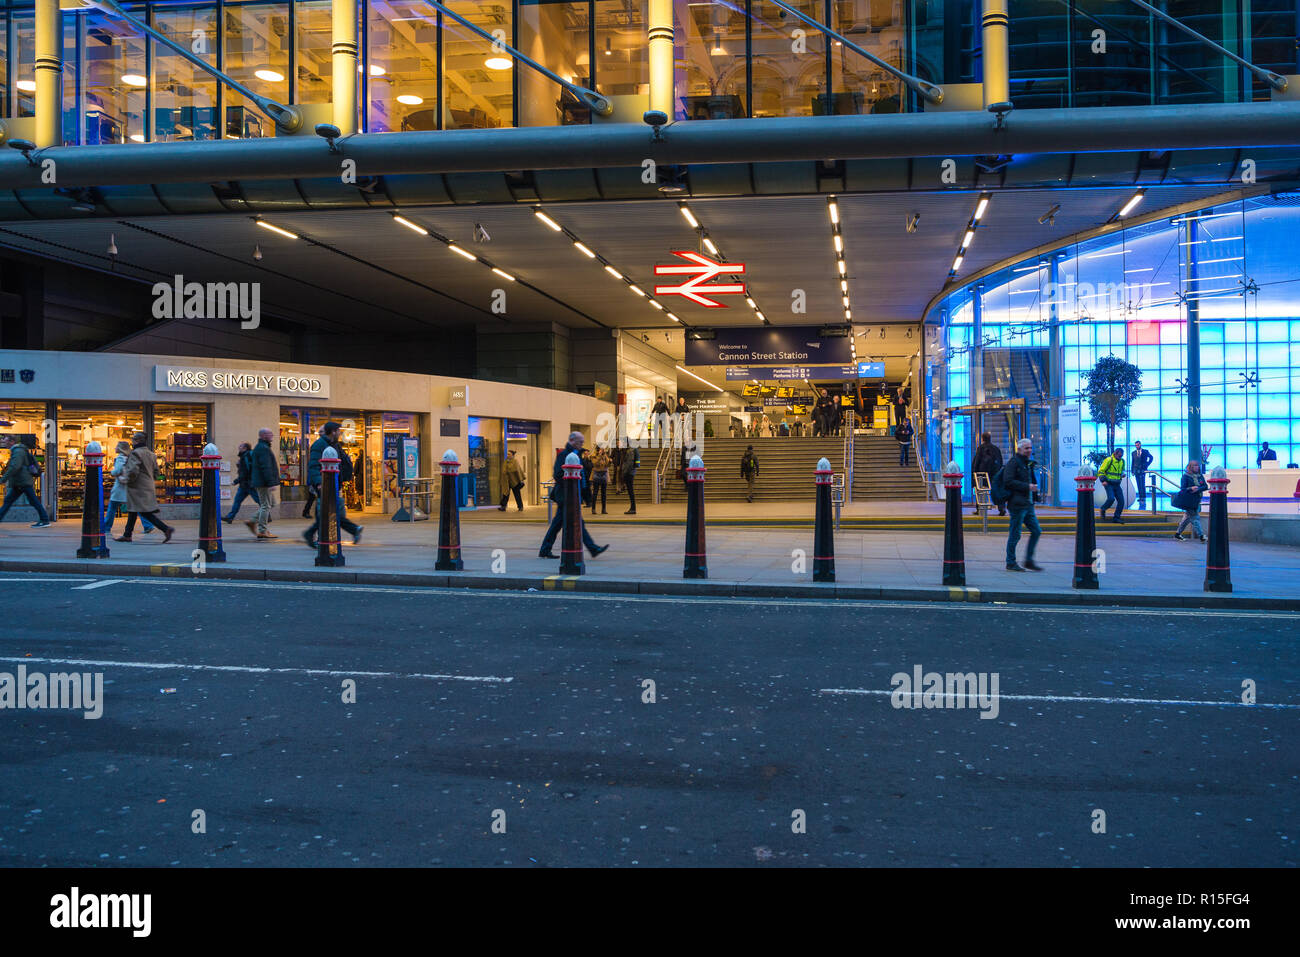 Morning commuters at Cannon Street railway station, London, England, UK Stock Photo